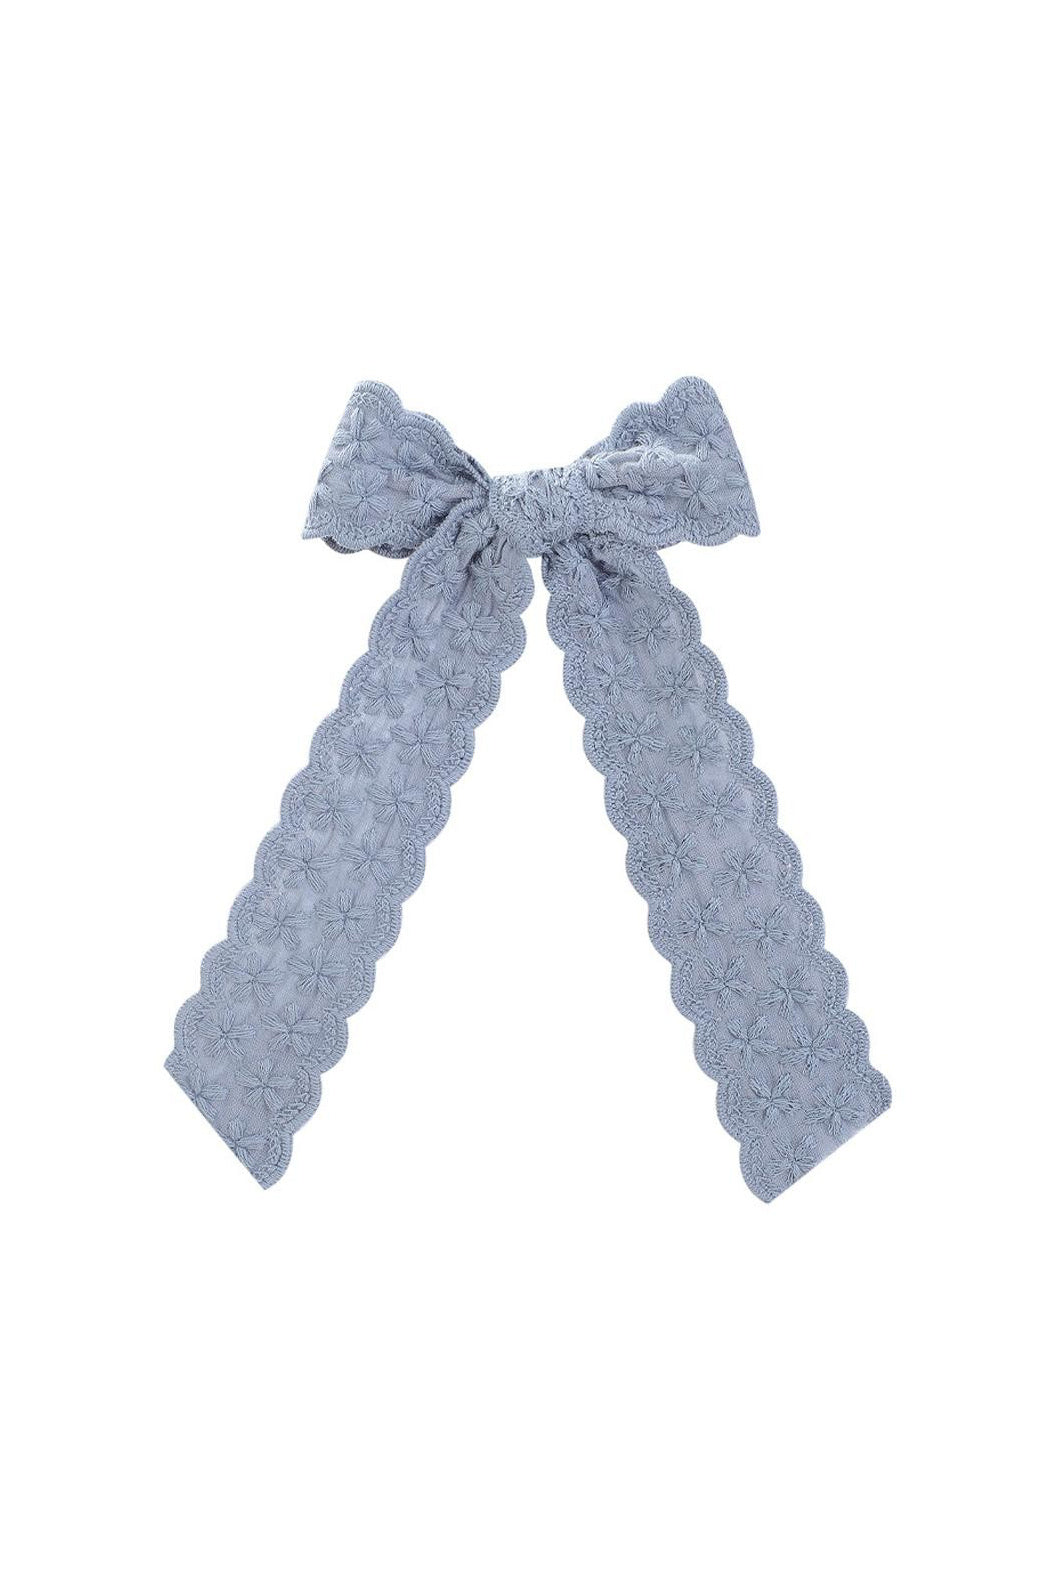 Embroidered Scalloped Bow Hair Clip